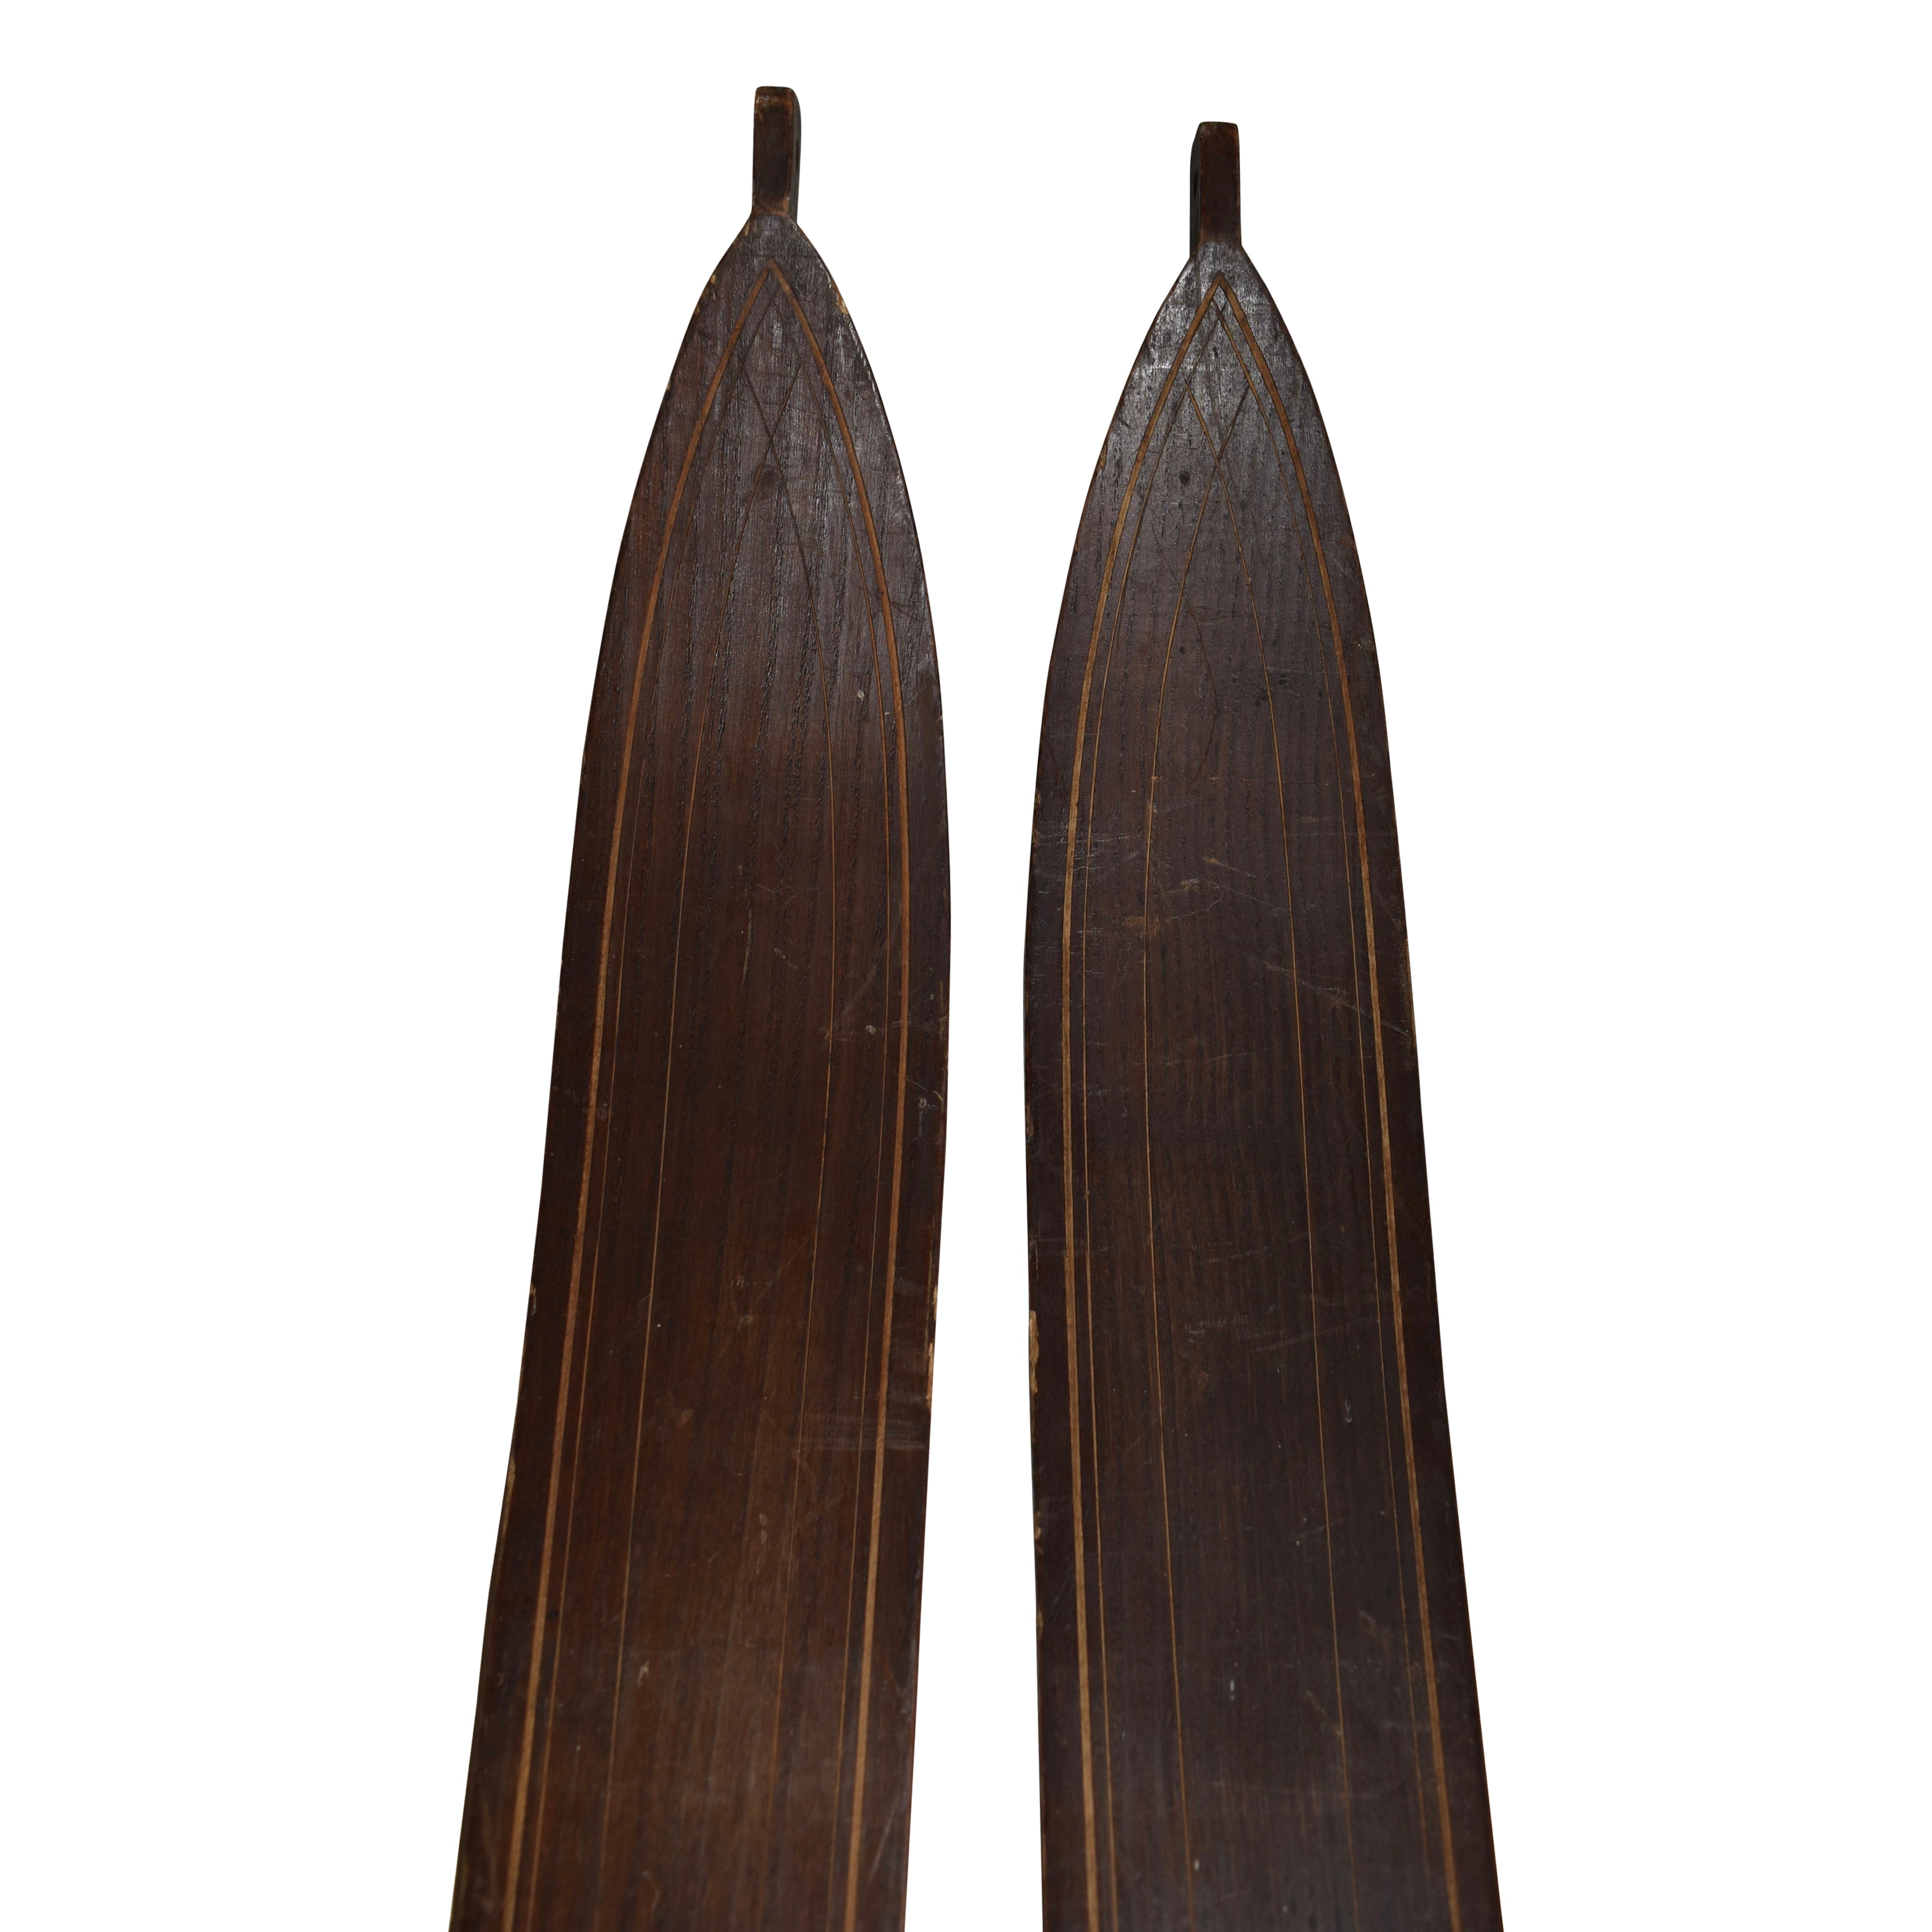 Wooden Flat Top Skis